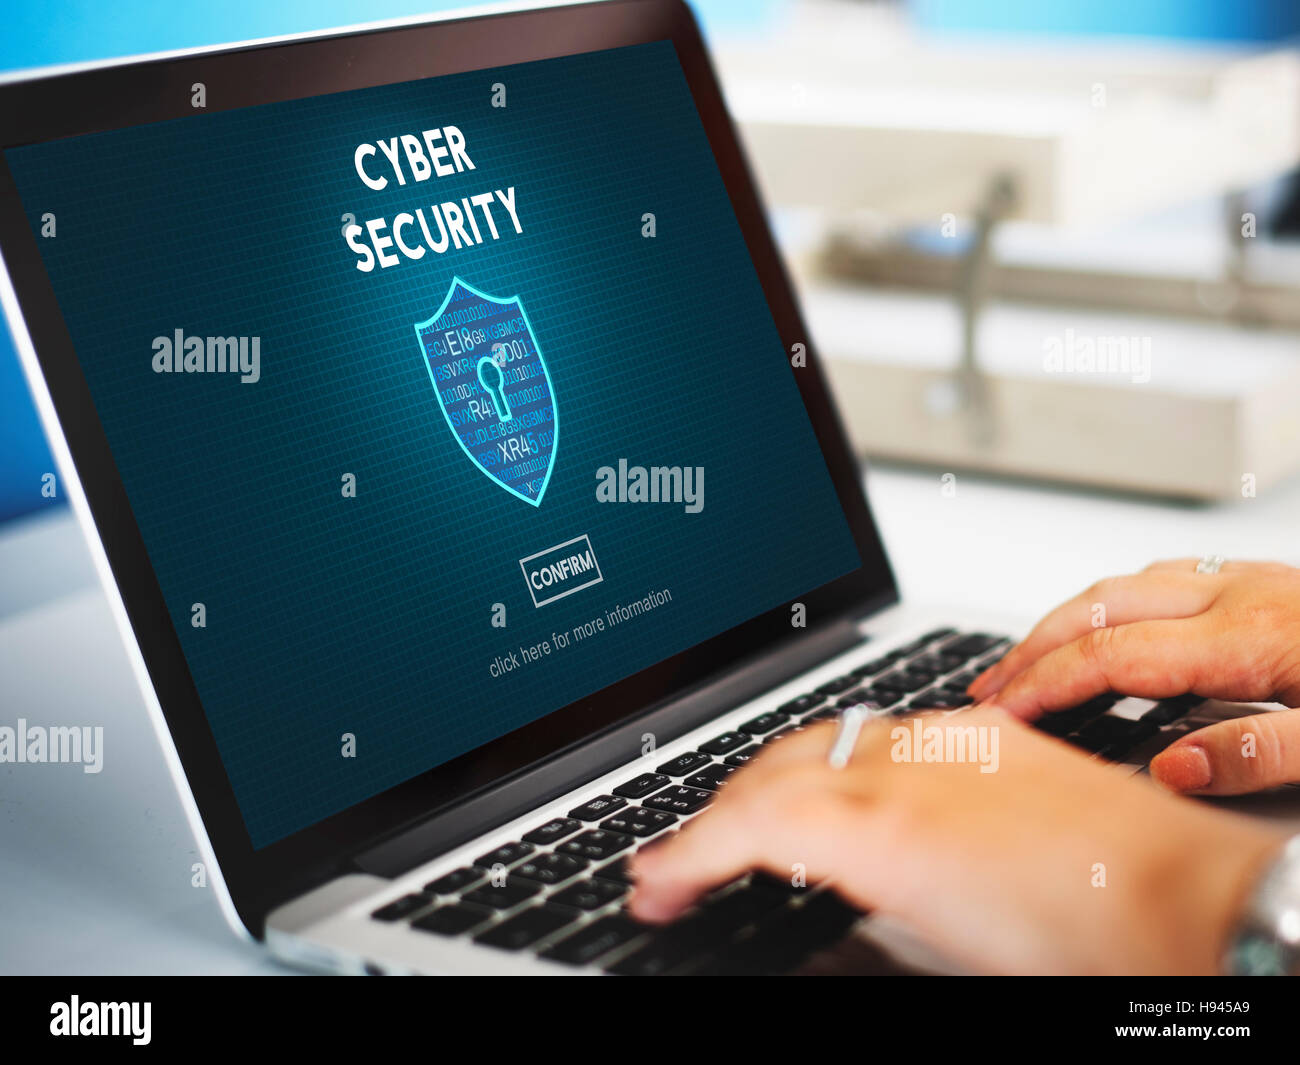 Cyber Security Protection Firewall Interface Concept Stock Photo